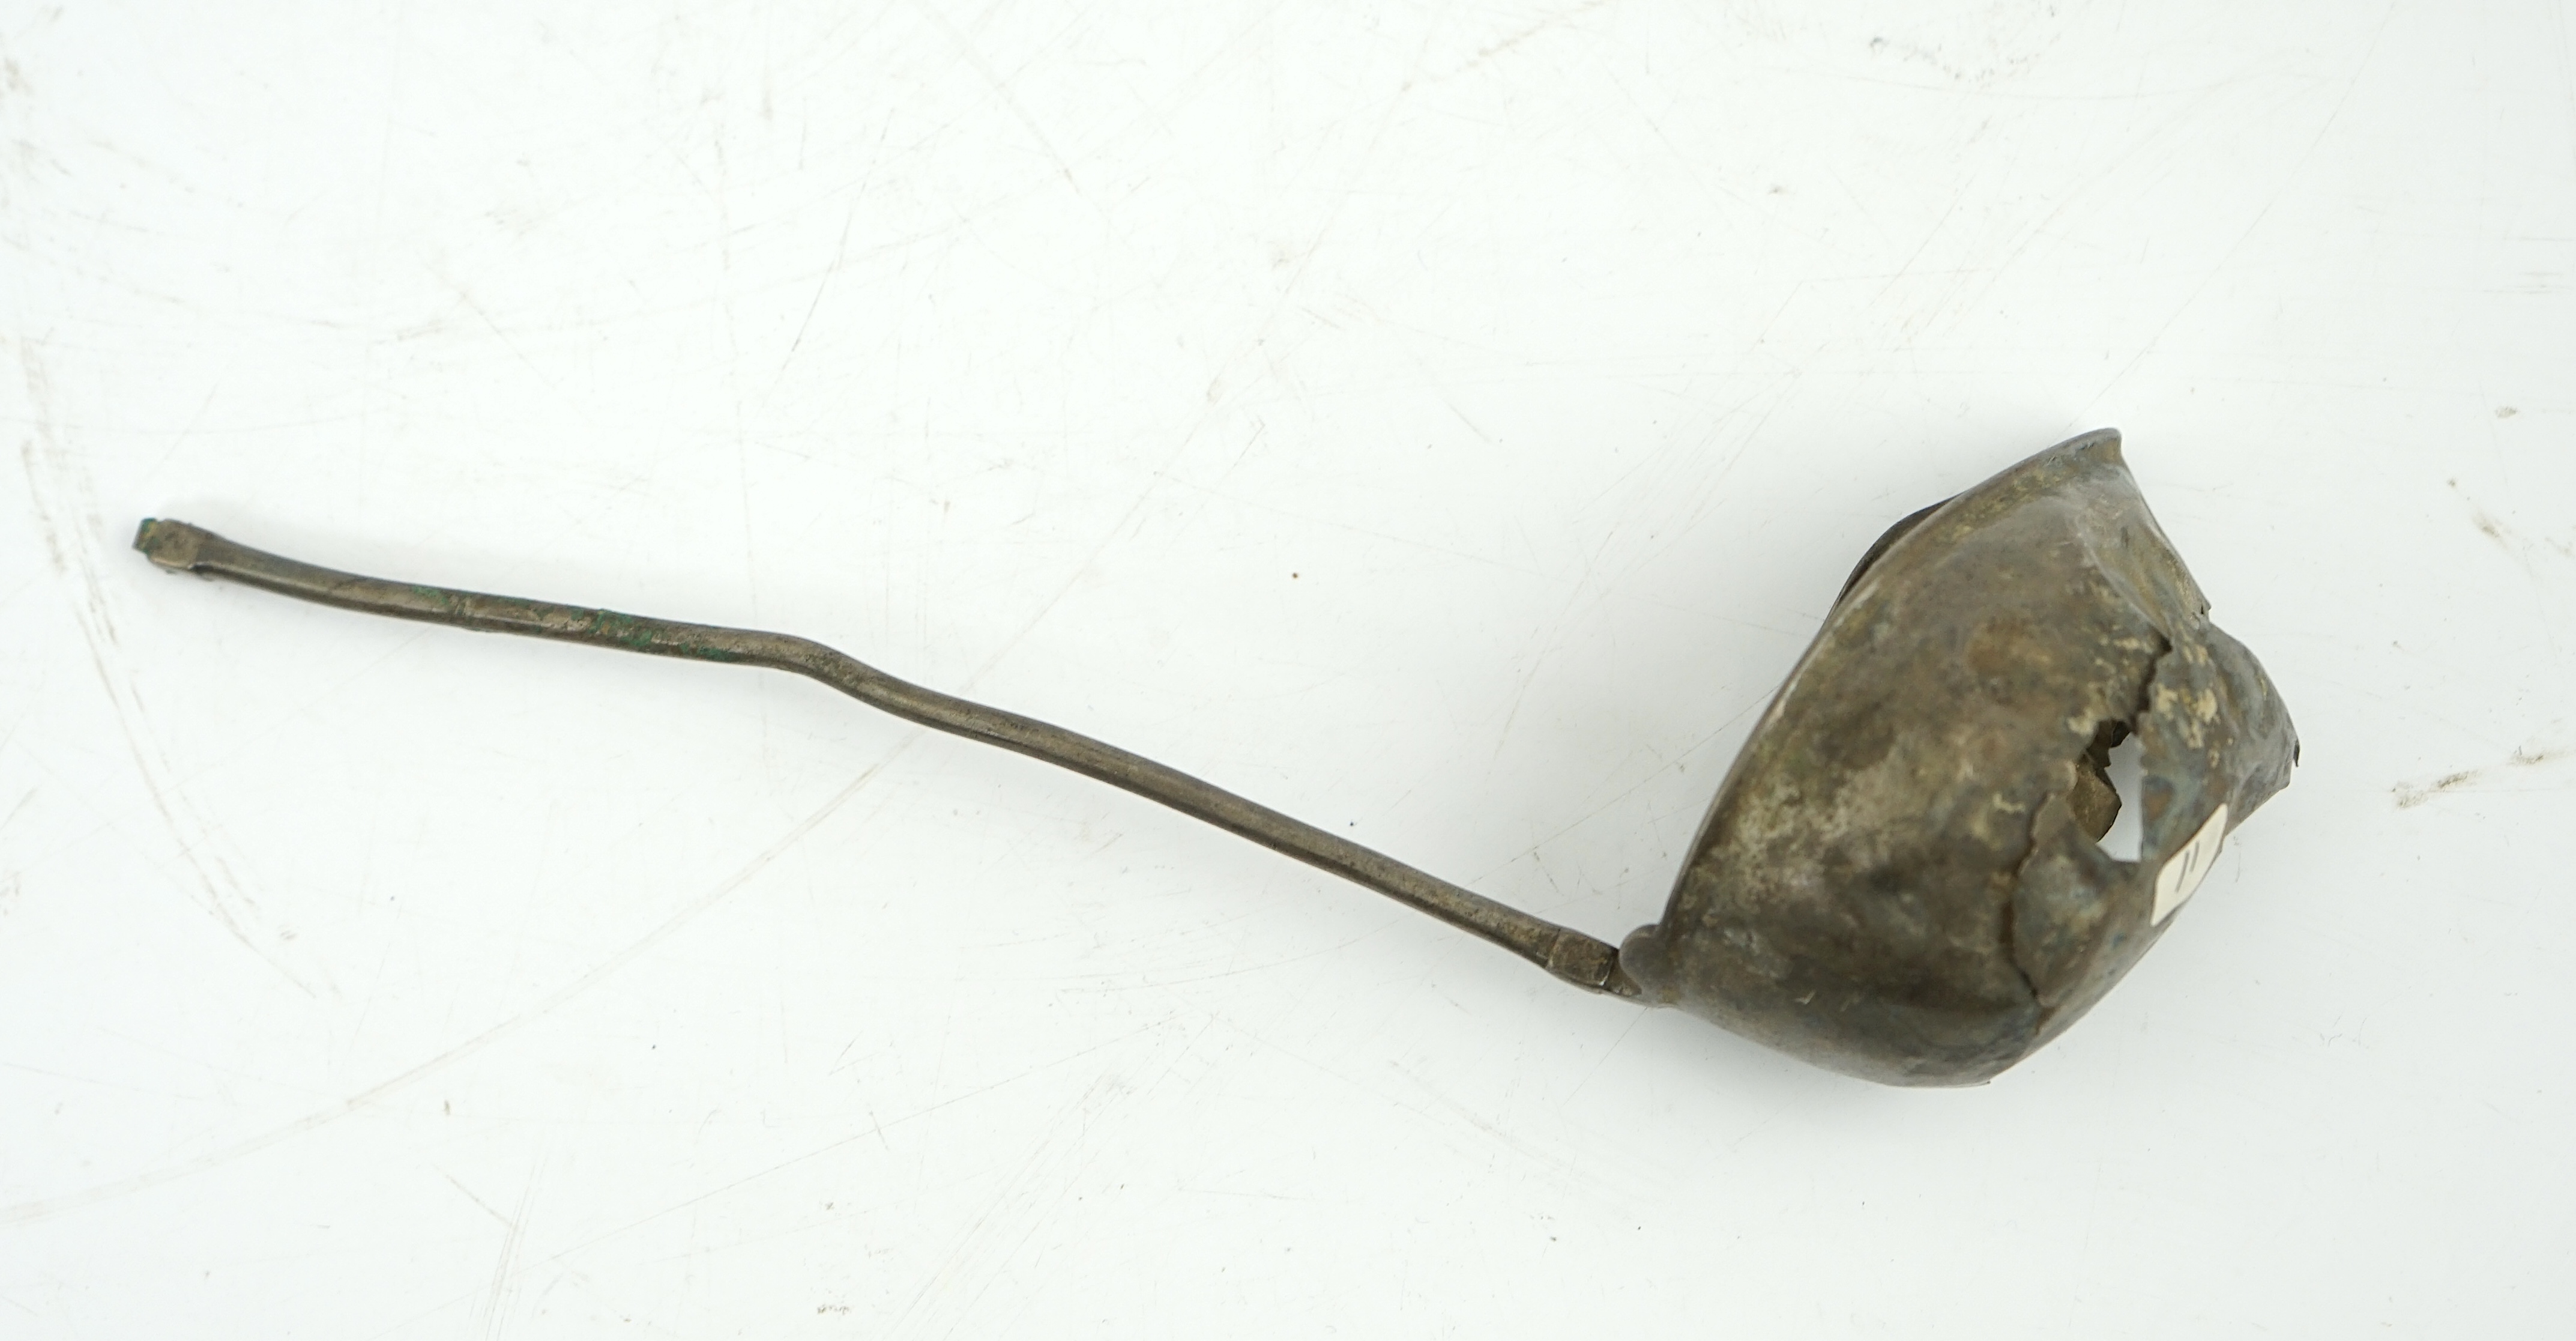 A silver ladle, Roman or Gandhara, c. late 1st century BC - early 1st century A.D.